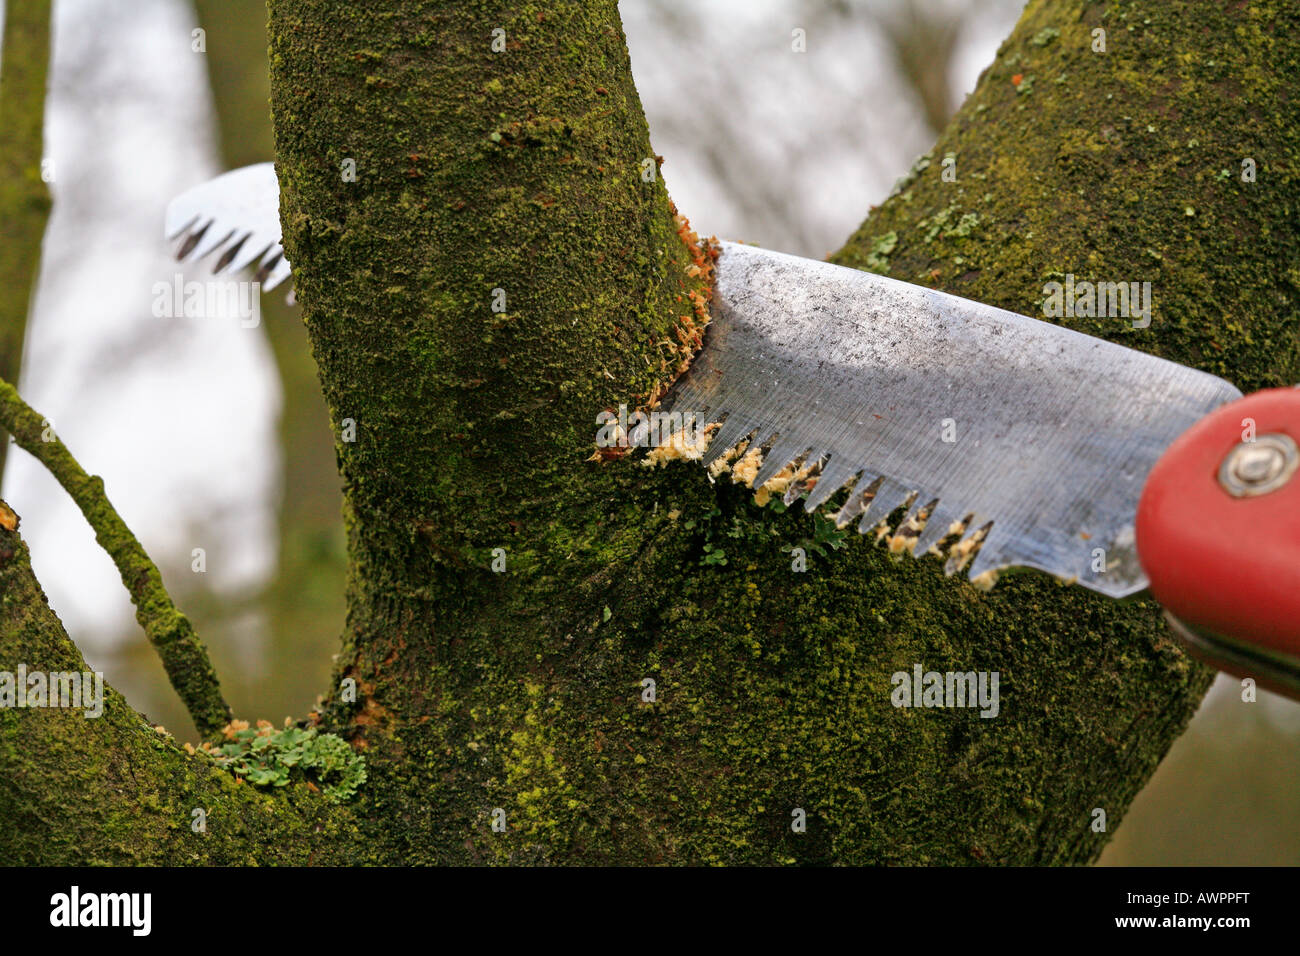 Cutting branches of a fruit tree with a small hand-held saw Stock Photo